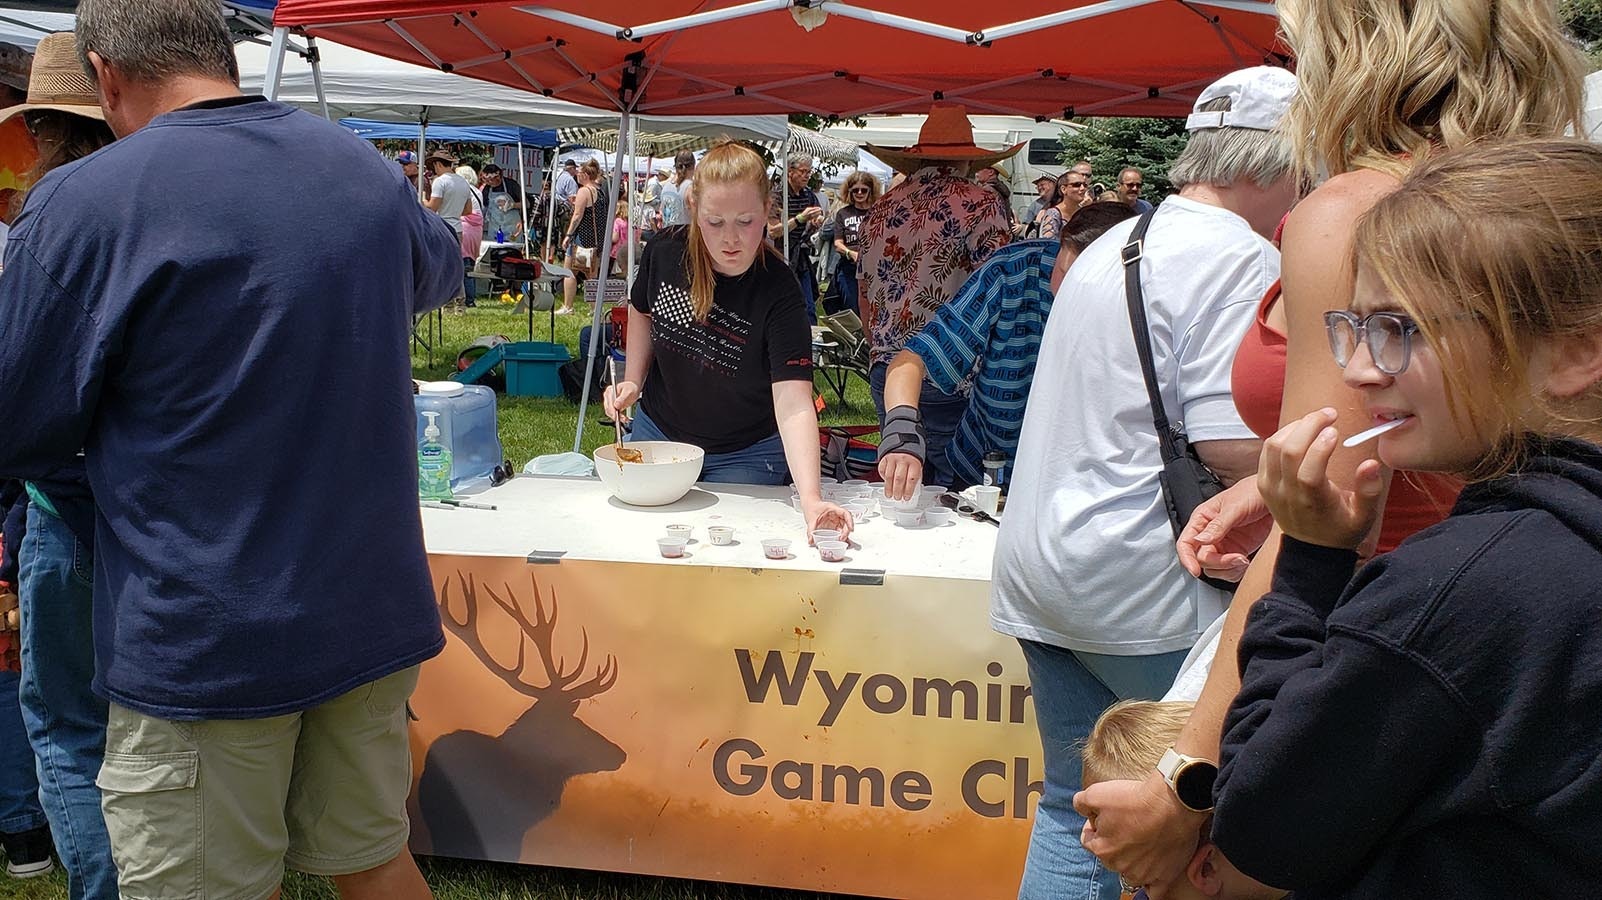 Wyoming Game Chili was the People's Choice Winner at this year's Chugwater Chili Cookoff.